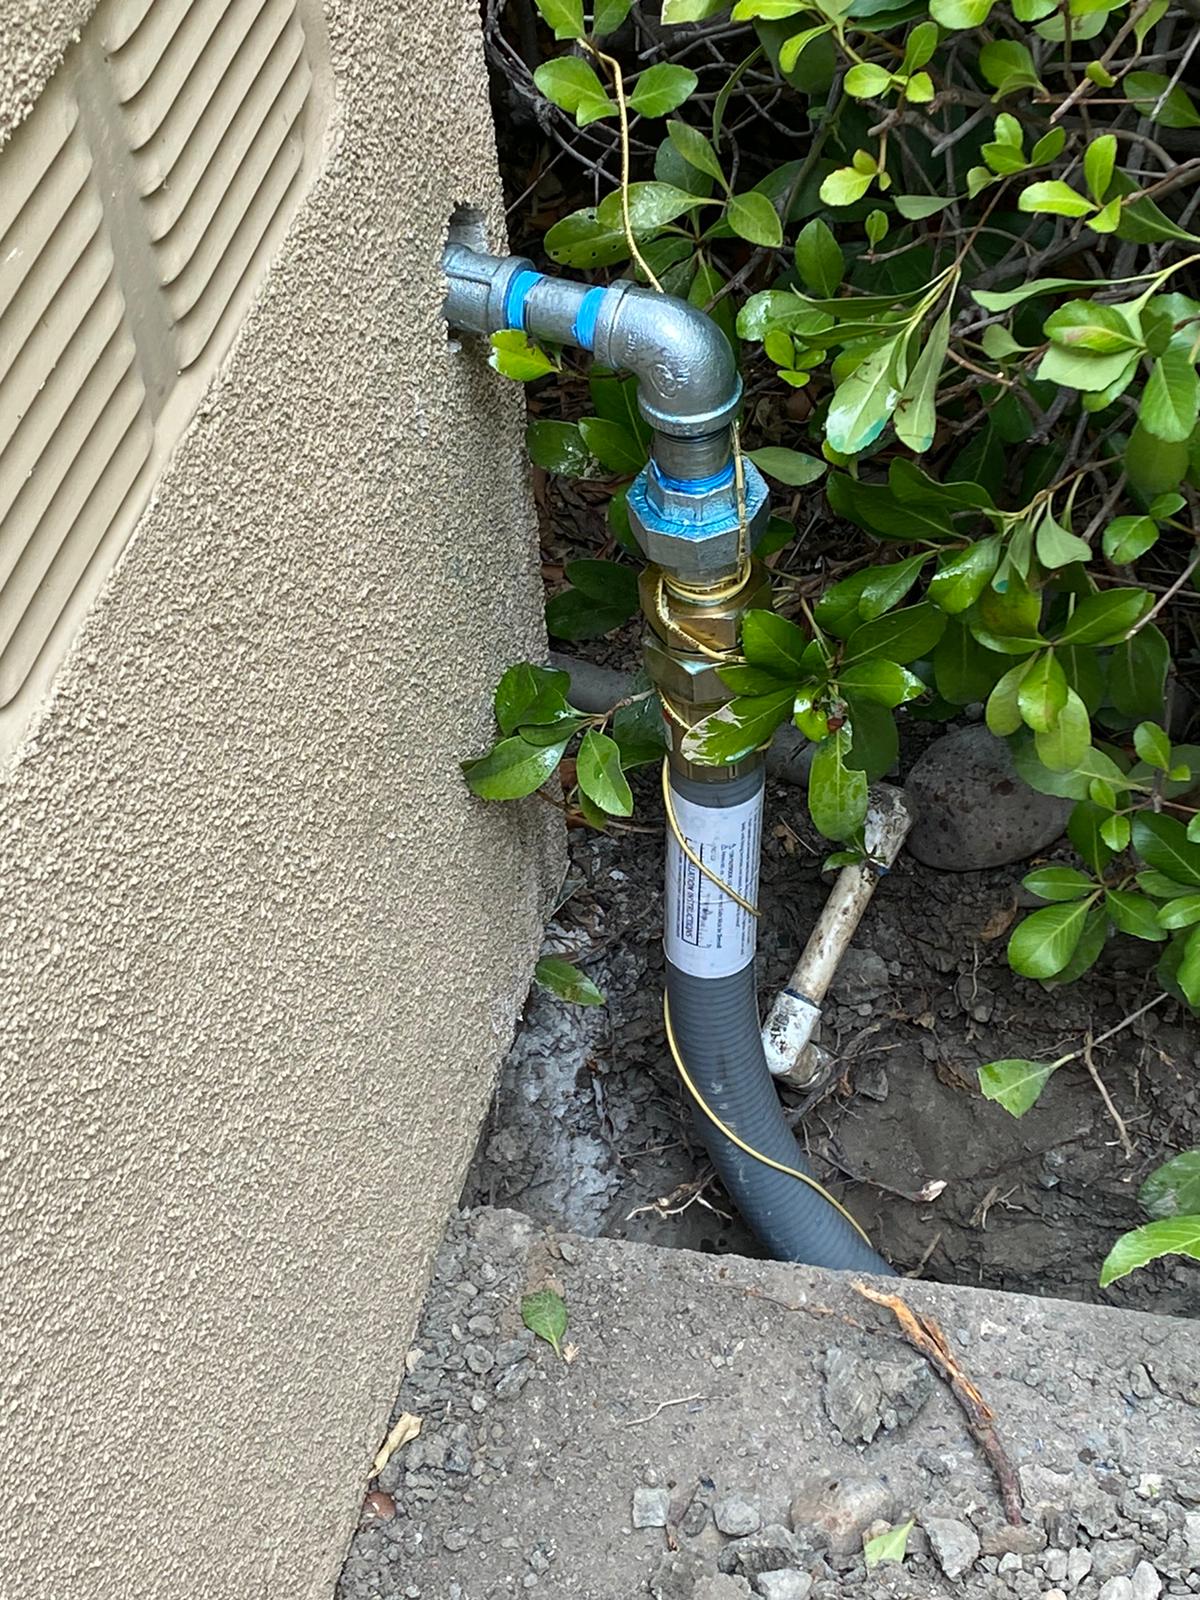 Bay Area Plumbing and Rooter